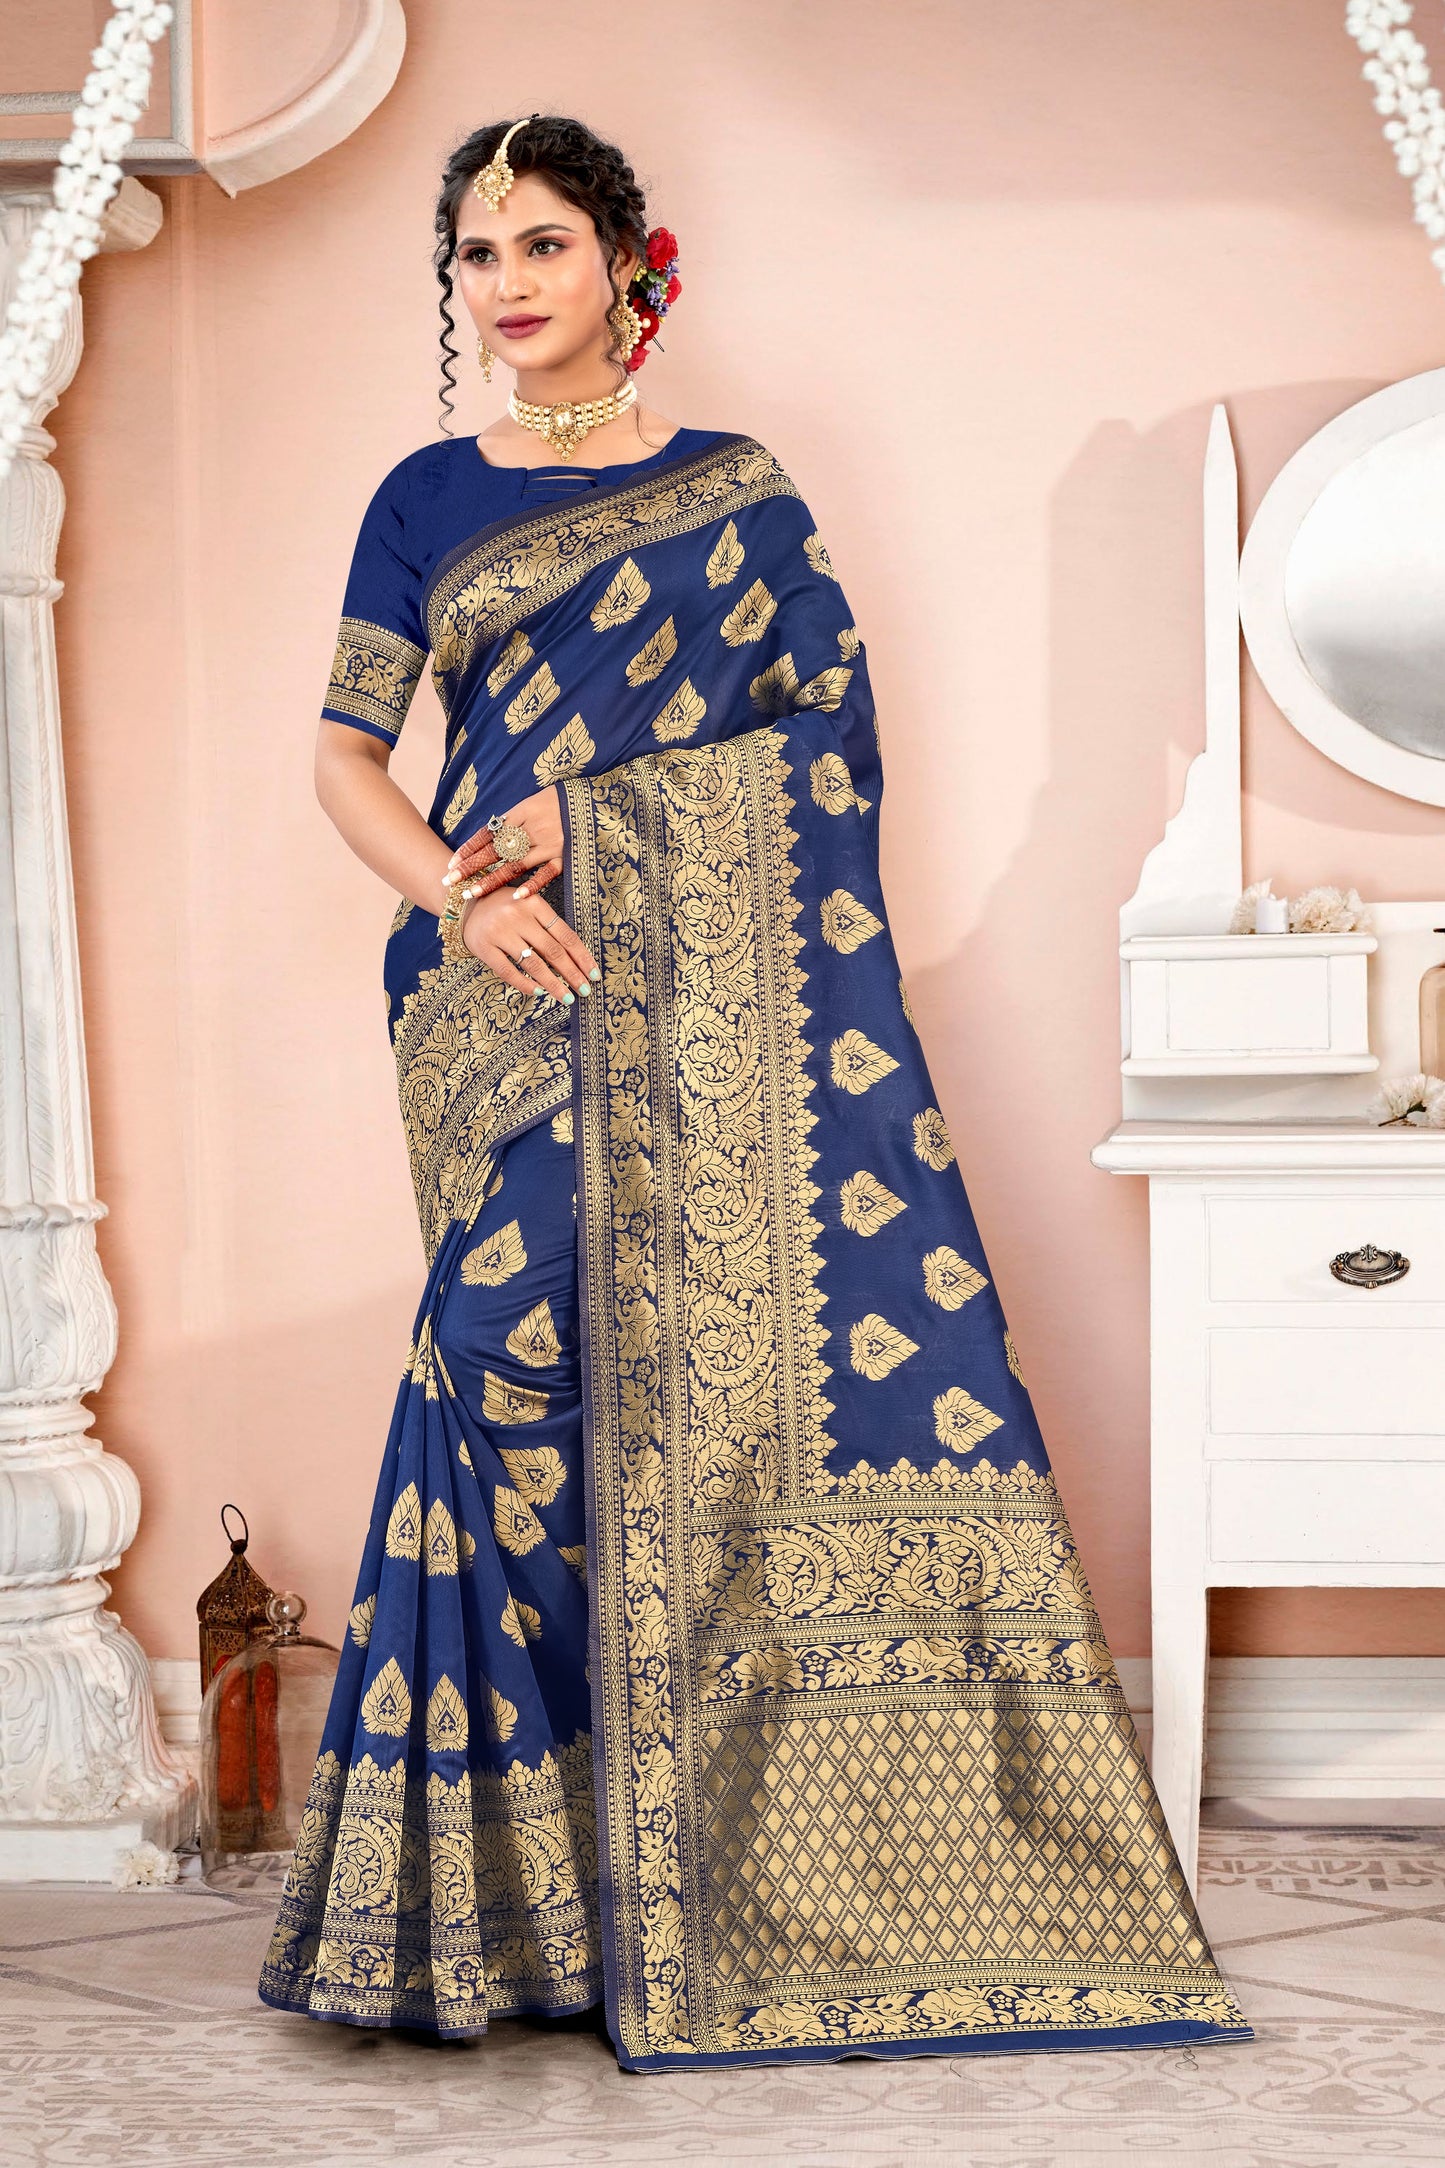 GORGEOUS PURE WEAVING BANARSI SILK SAREE IN BLUE FOR ALL FESTIVALS